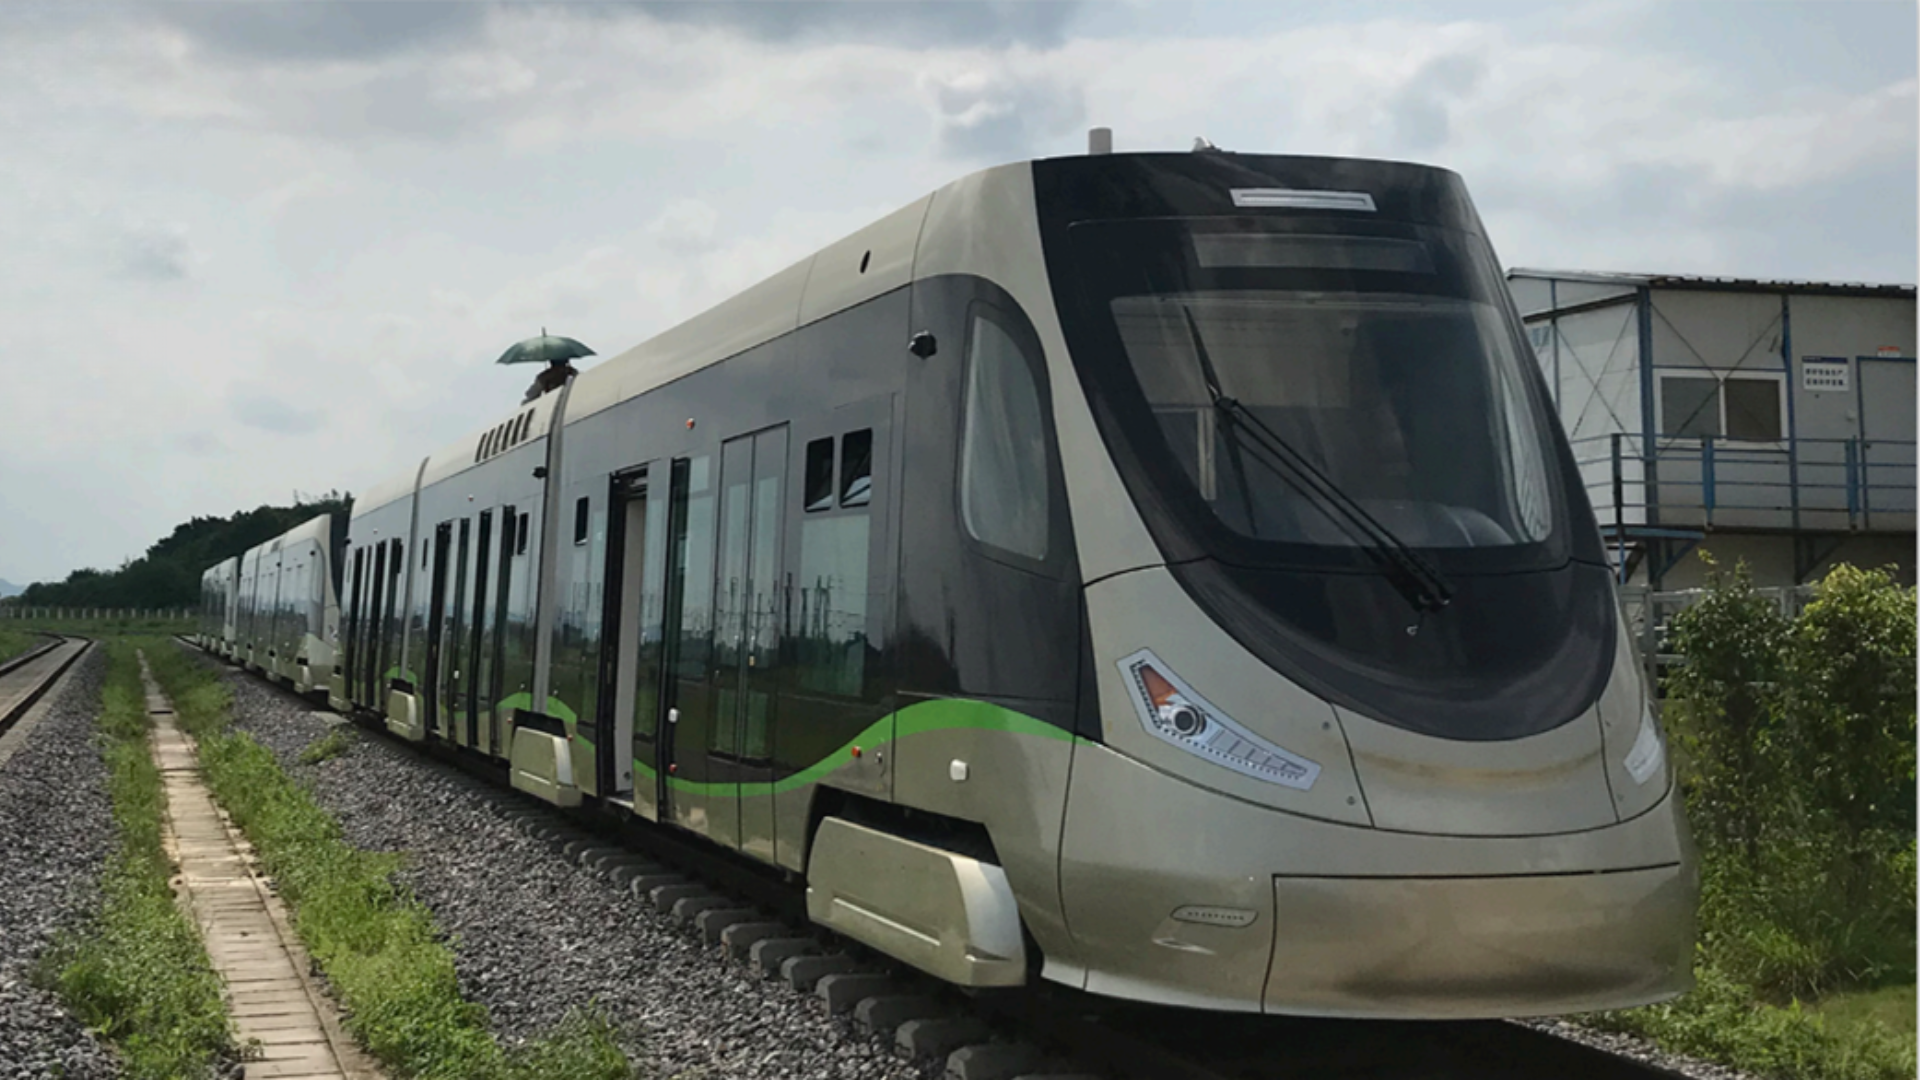 Hydrogen fuel cell-powered tram in Foshan, China